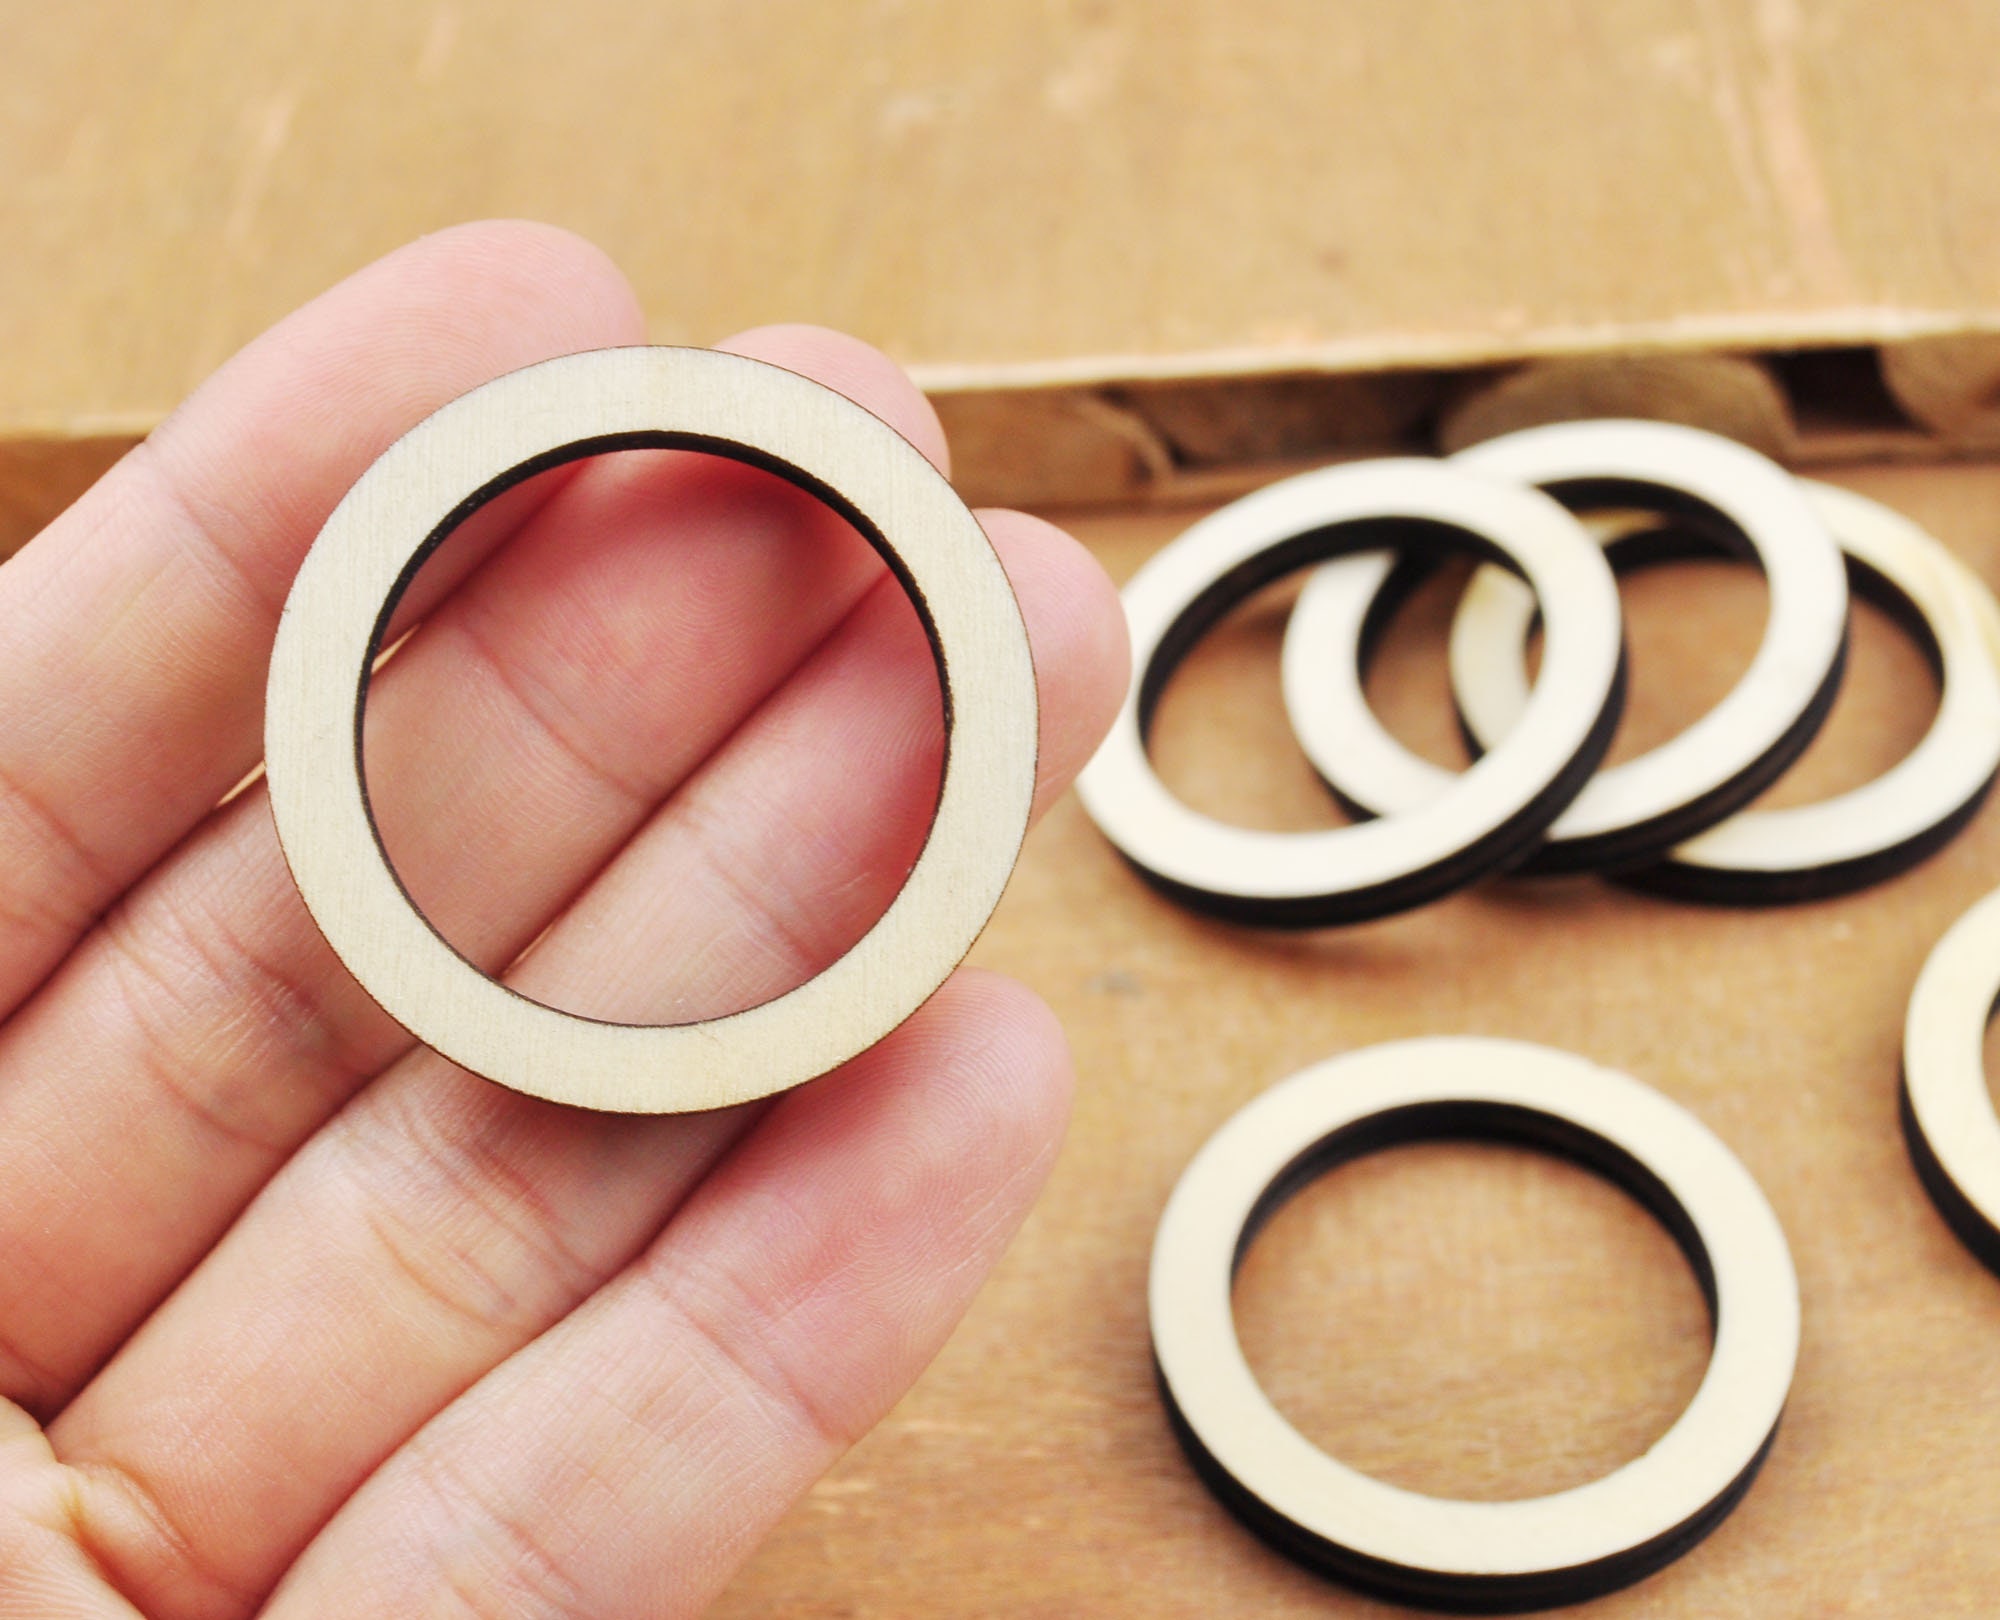 60 Pcs Unfinished Wood Rings for Macrame,5 Different Sizes Wooden Rings for  Crafts,70mm/55mm/40mm/30mm/20mm,Natural Solid Wood Ring for Ornaments